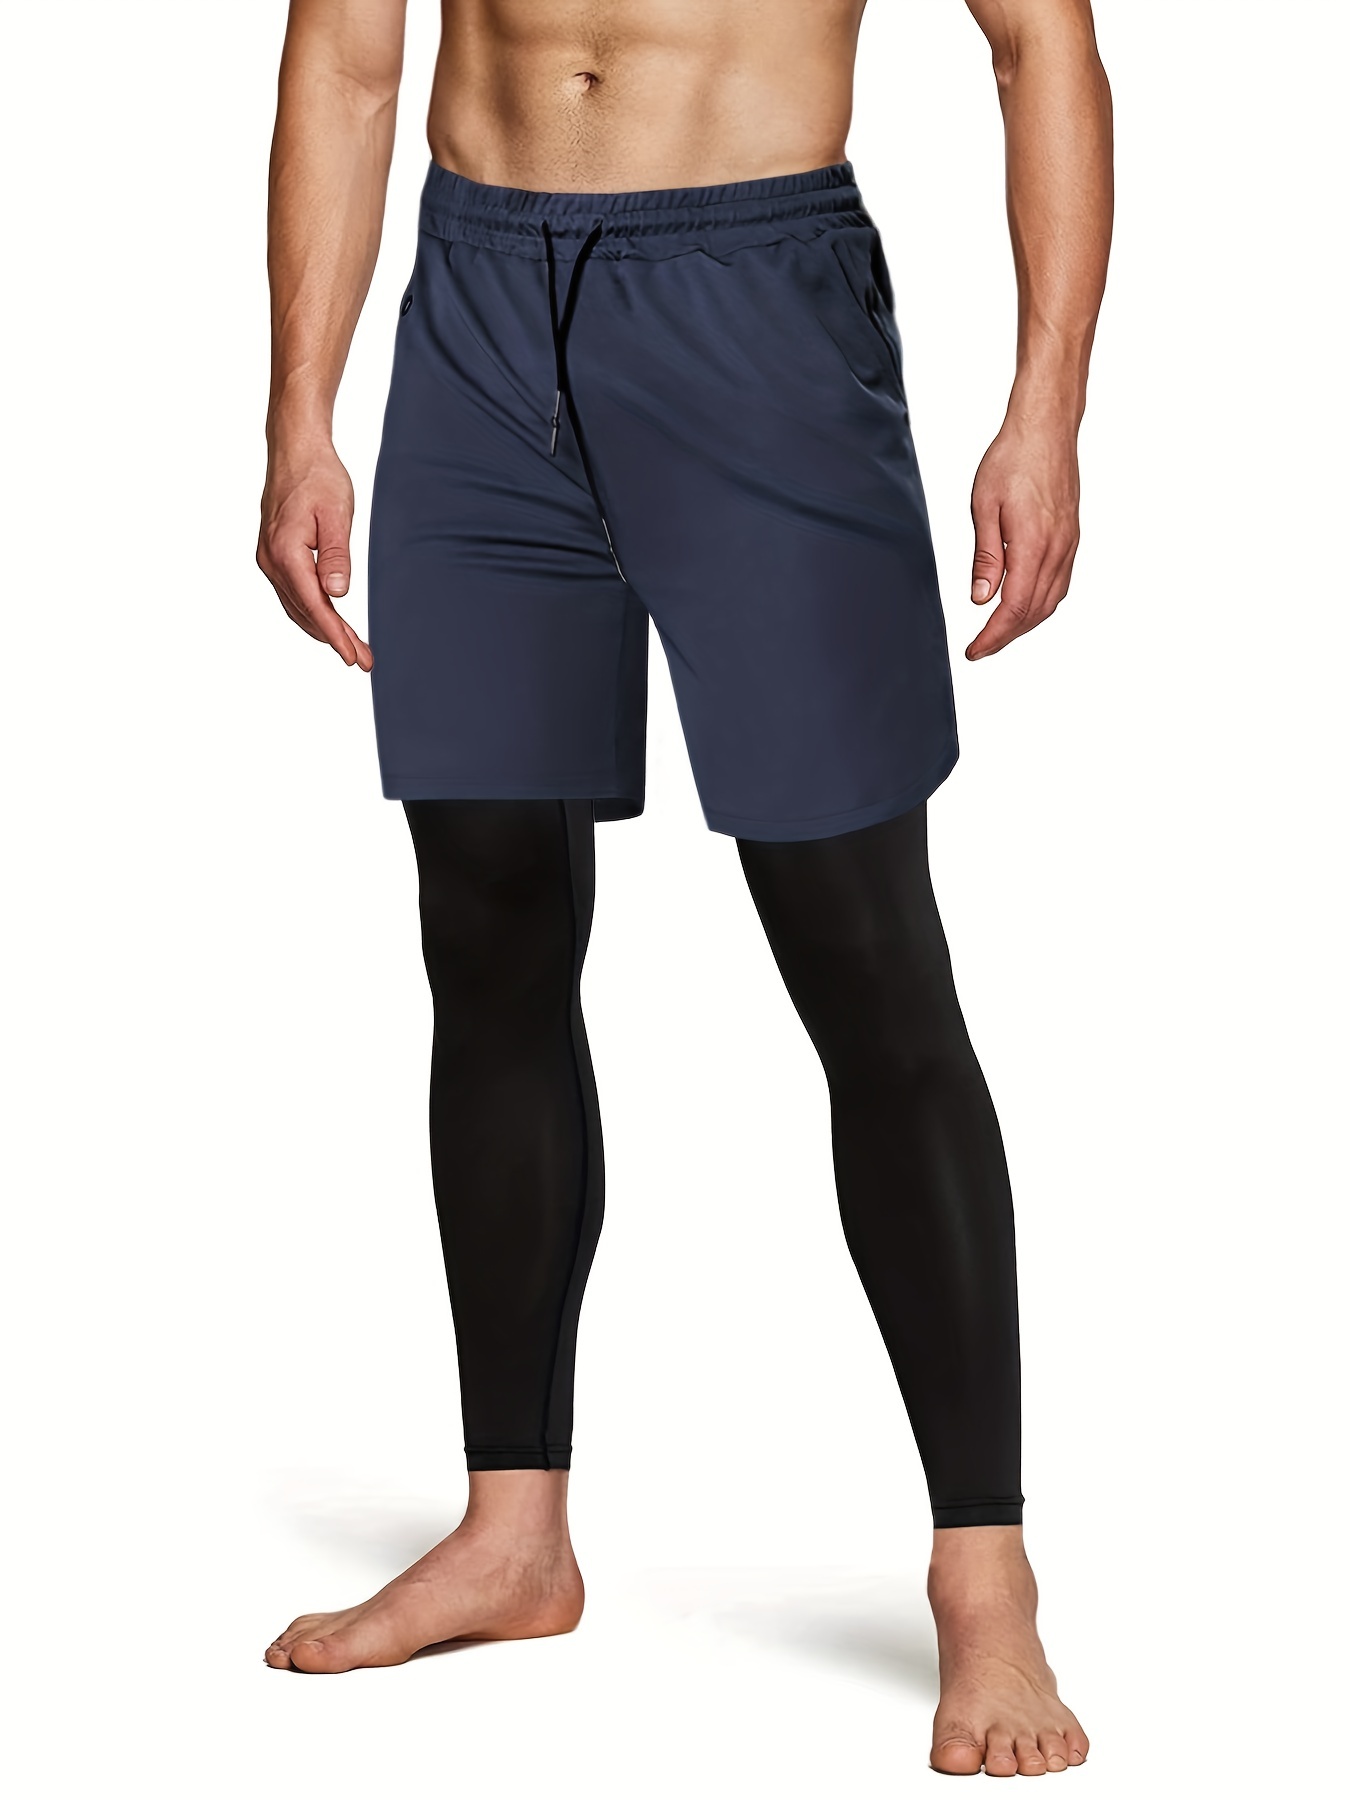 Navy Blue Workout Shorts with Compression Pants - Men's Sportswear